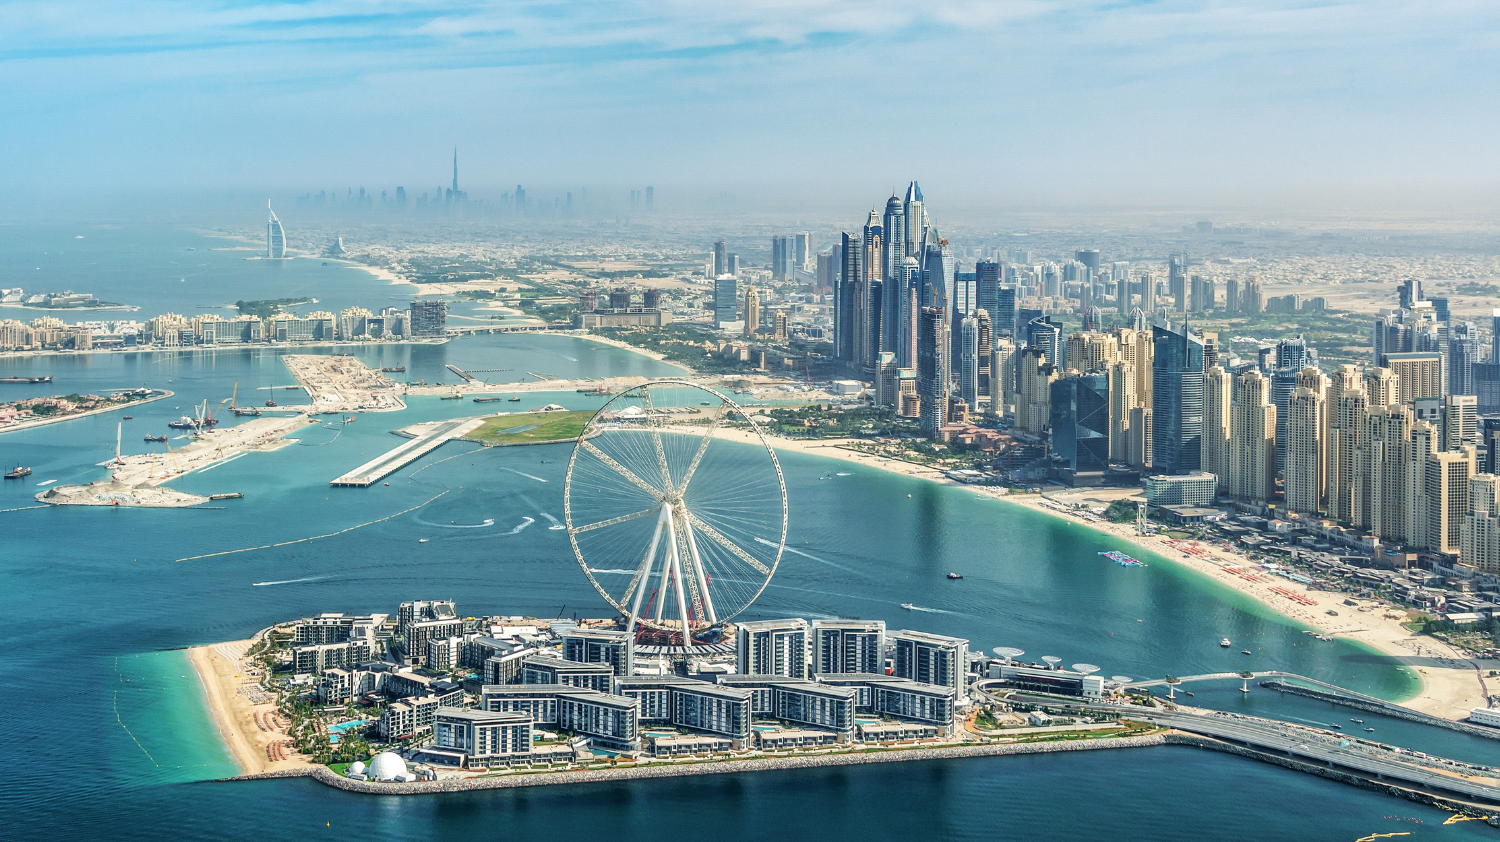 To begin a hotel business in Dubai, you must first choose an appropriate location for your hotel. Make sure to do some research on the surrounding areas and people